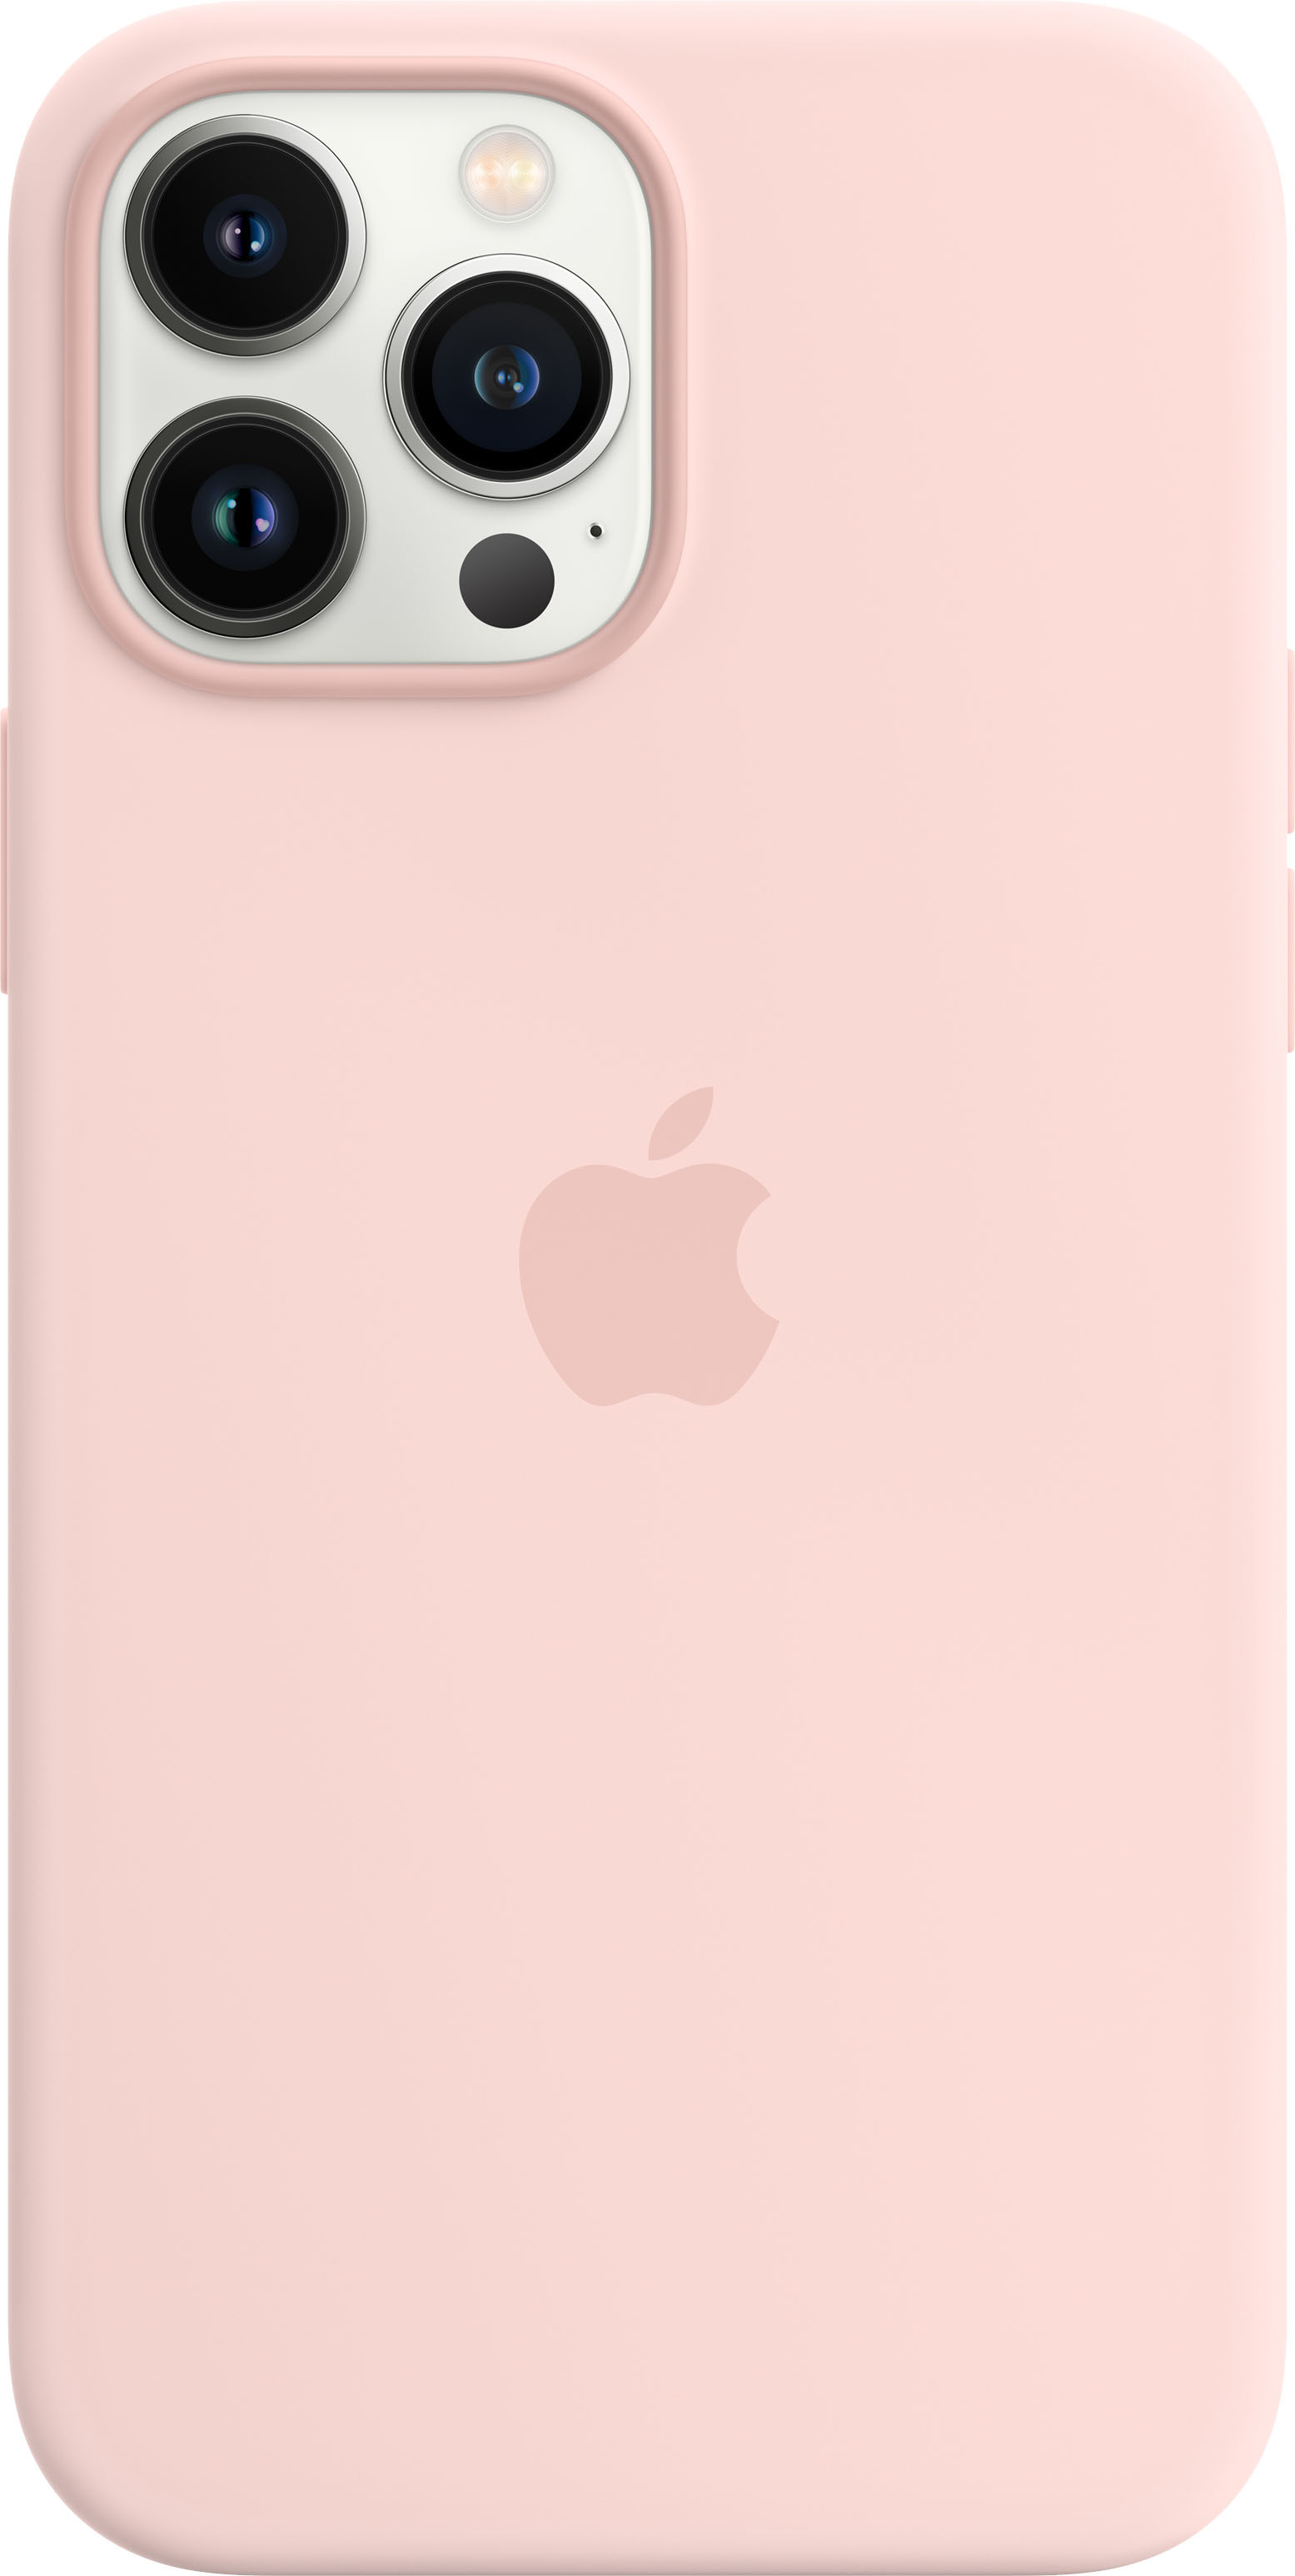 Apple iPhone 7 Silicone Case Flamingo MQ592ZM/A - Best Buy